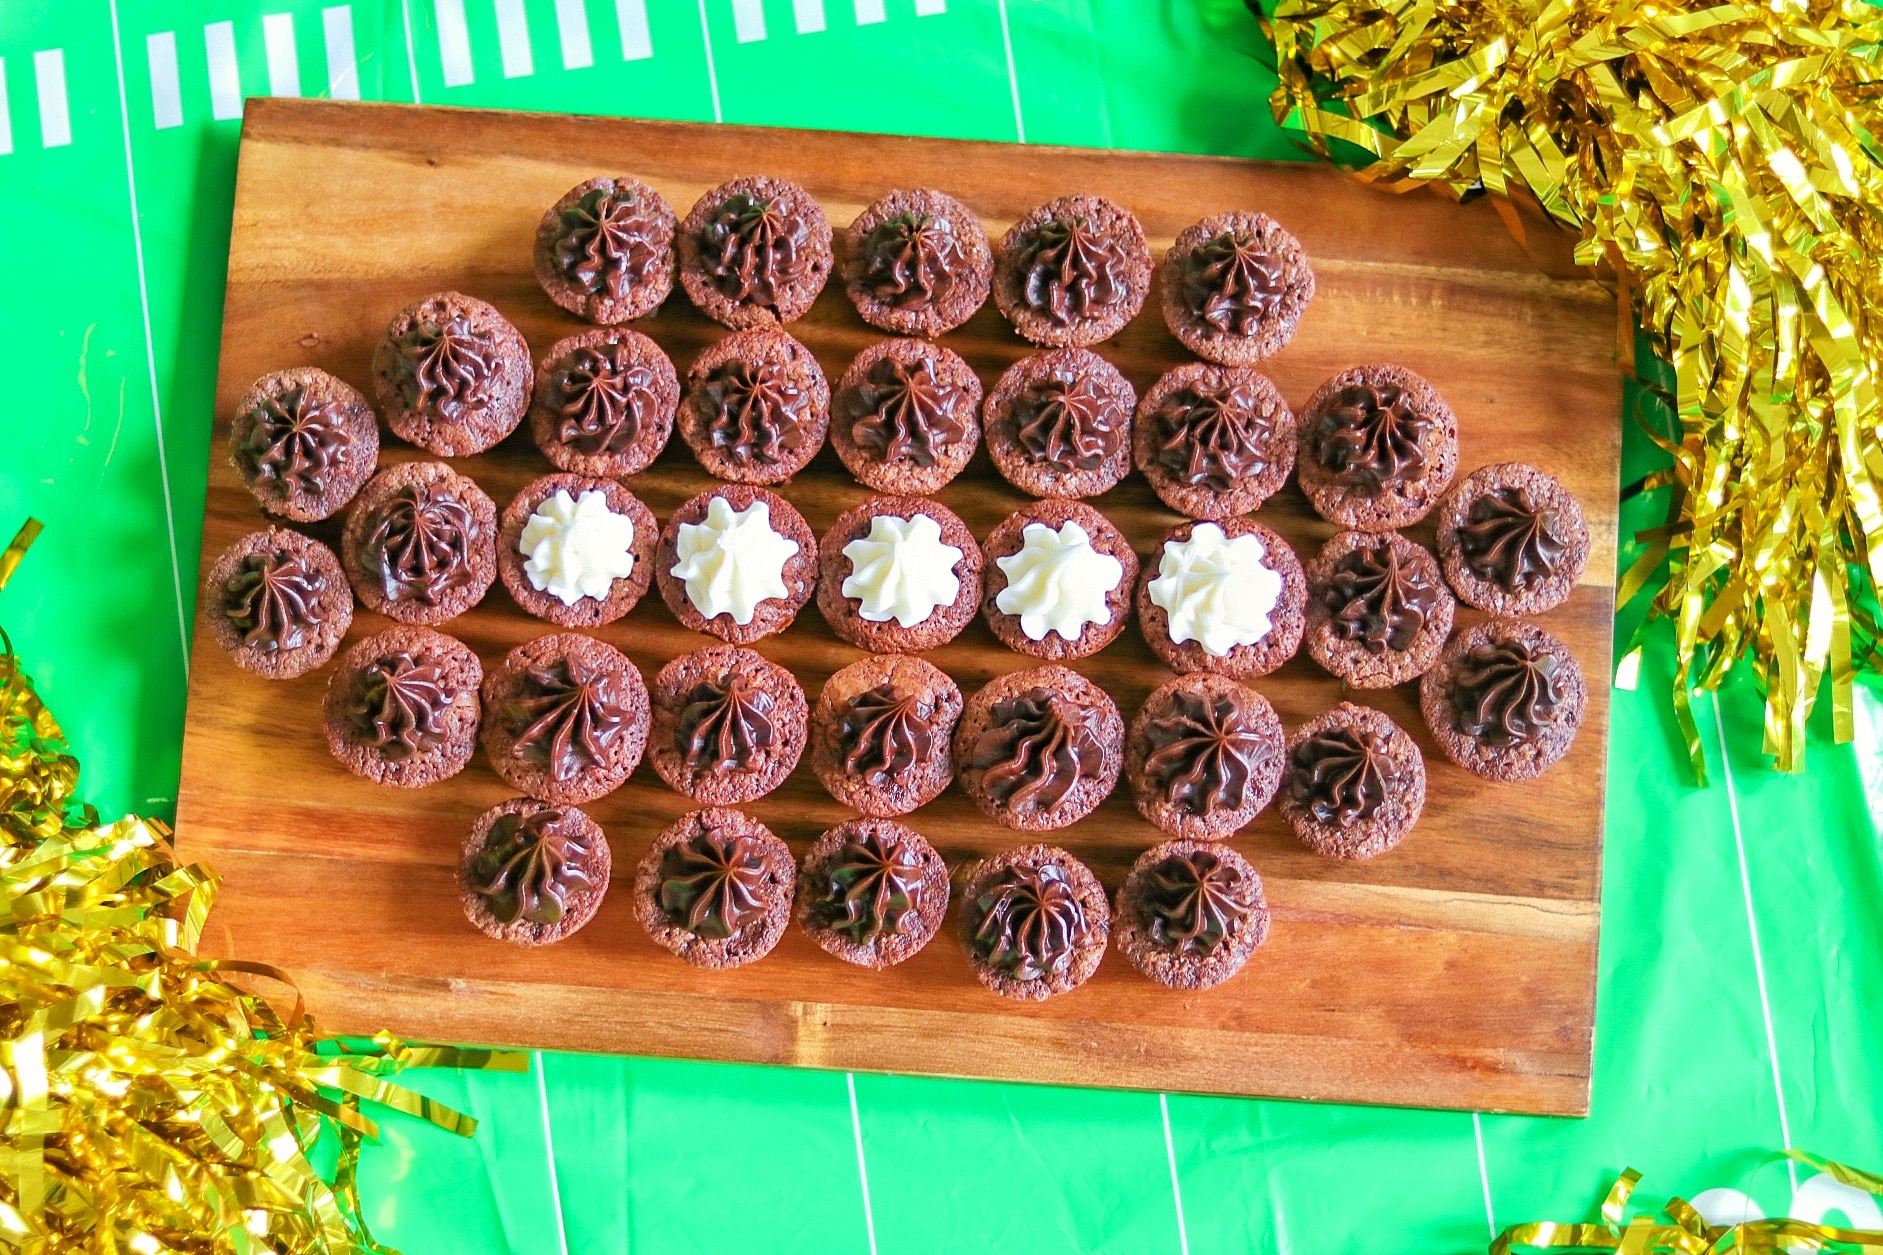 Football Brownie Bites (and the best brownie bite recipe)